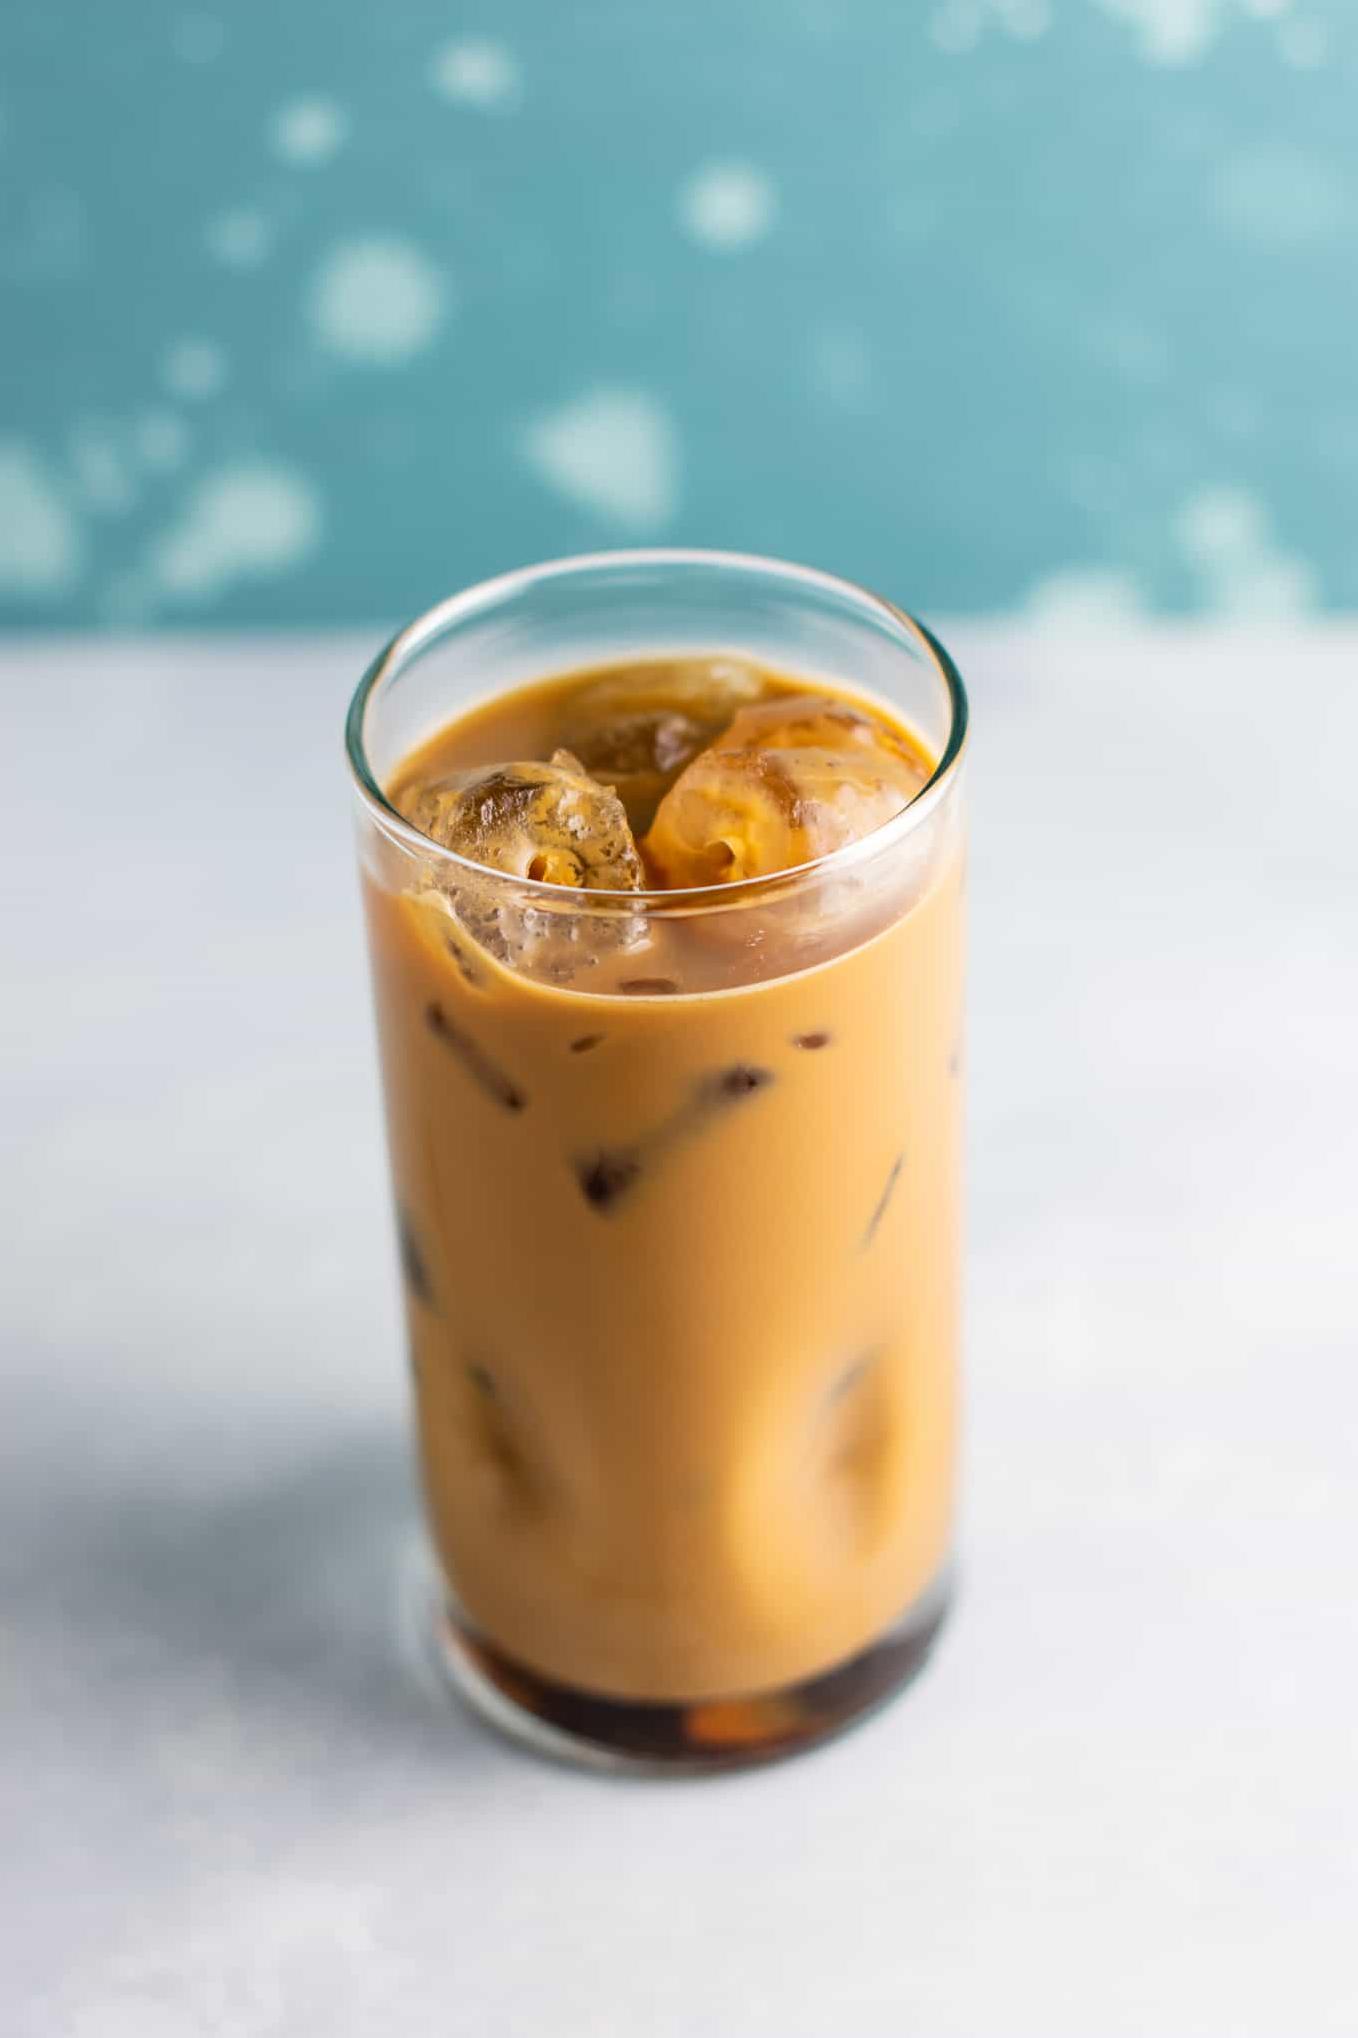  Chill out and kick back with a refreshing glass of instant iced coffee.